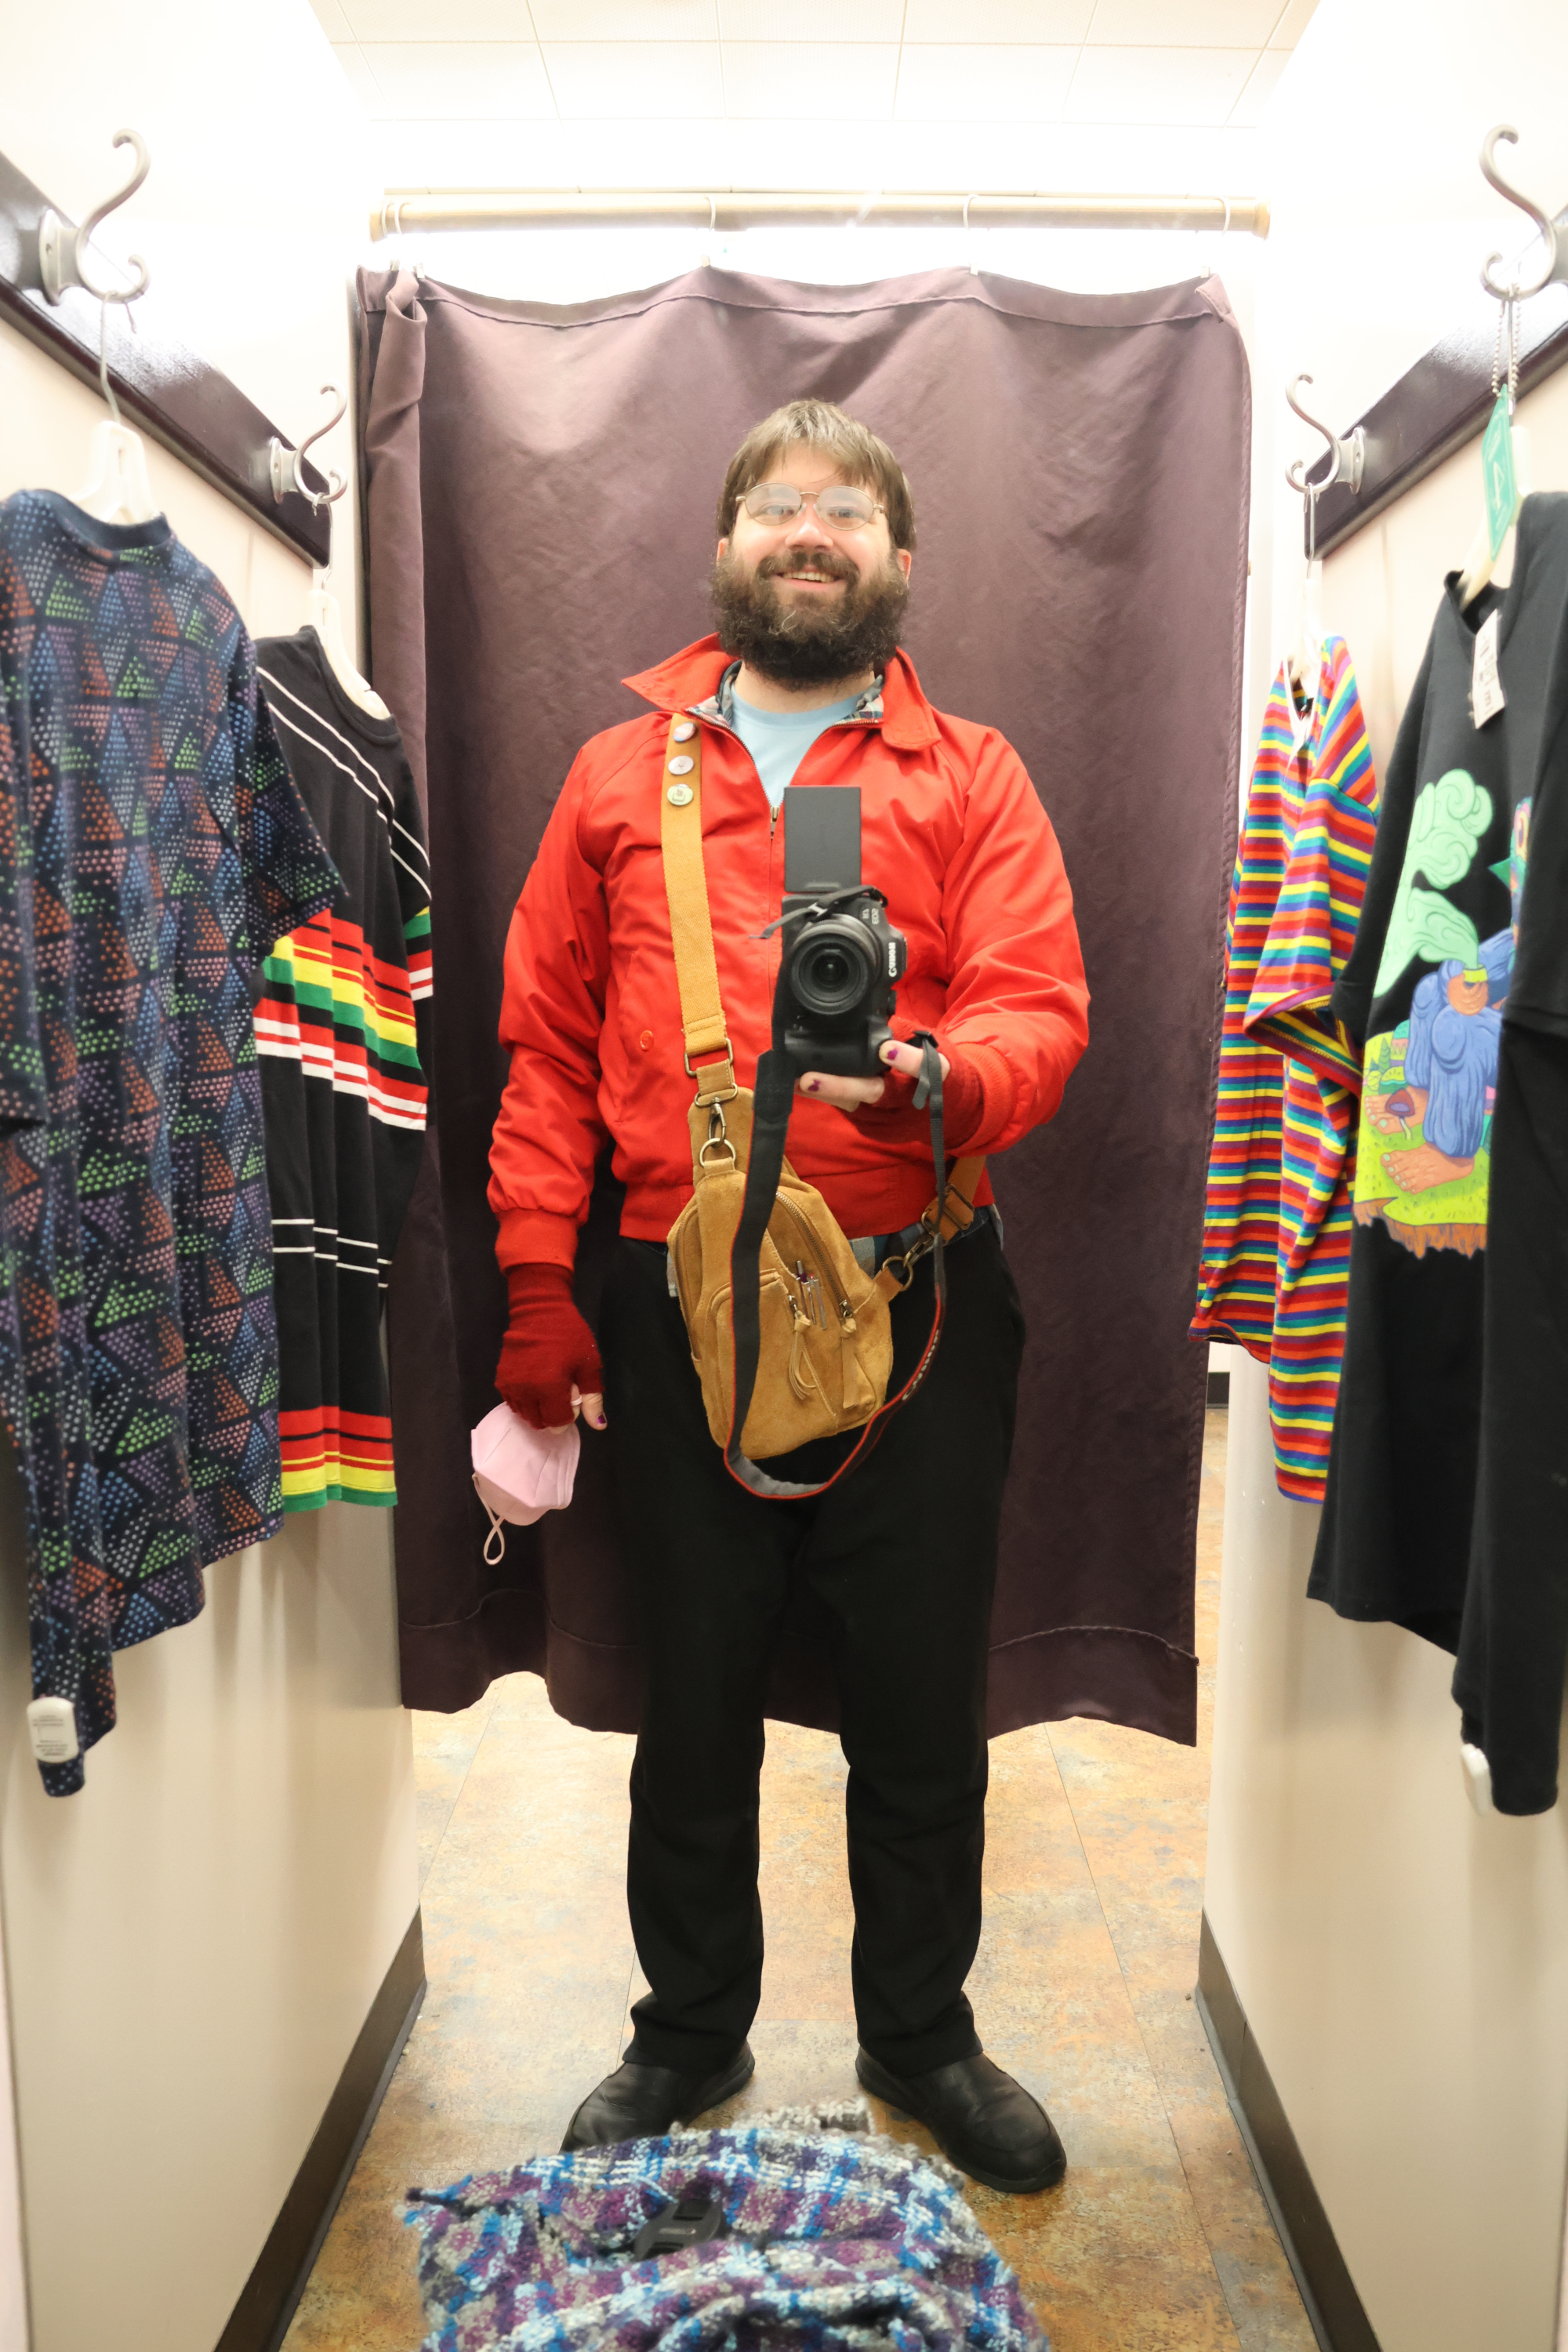 Me, bundled for cold weather, standing in a changing room. I'm pointing my camera at the mirror, and you can see four t-shirts hanging around me, ready to be tried on. From left to right: blue with colored dots arranged in triangle patterns; black with stripes of varrying thickness across the breast and waist; rainbow horizontal striped from collar to waist; a black shirt with art of a wizard smoking a pipe on it.